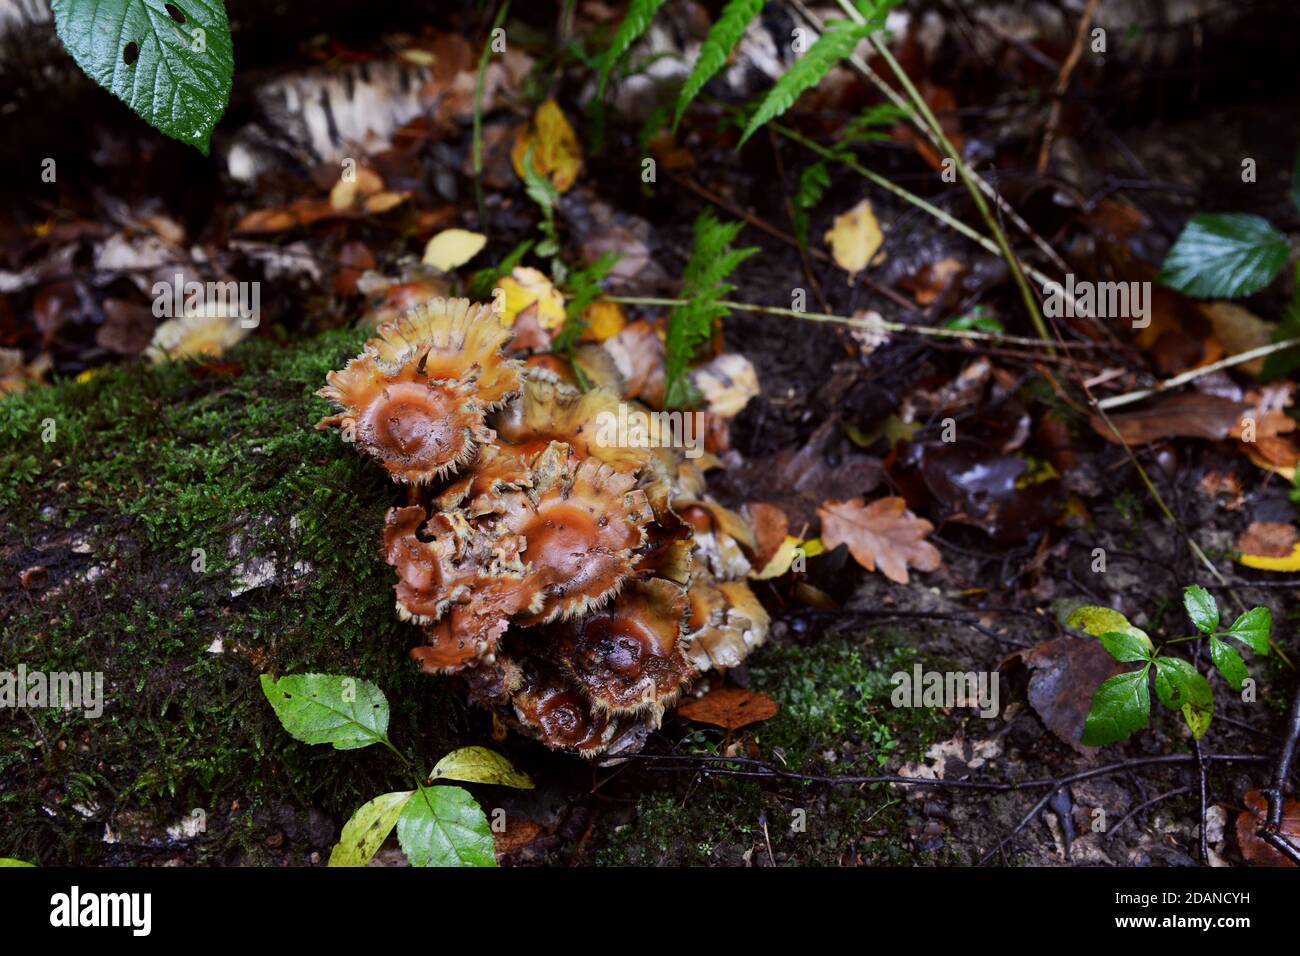 Small brown fungus grows on a wet, mossy log among bracken and fallen leaves on a damp forest floor Stock Photo